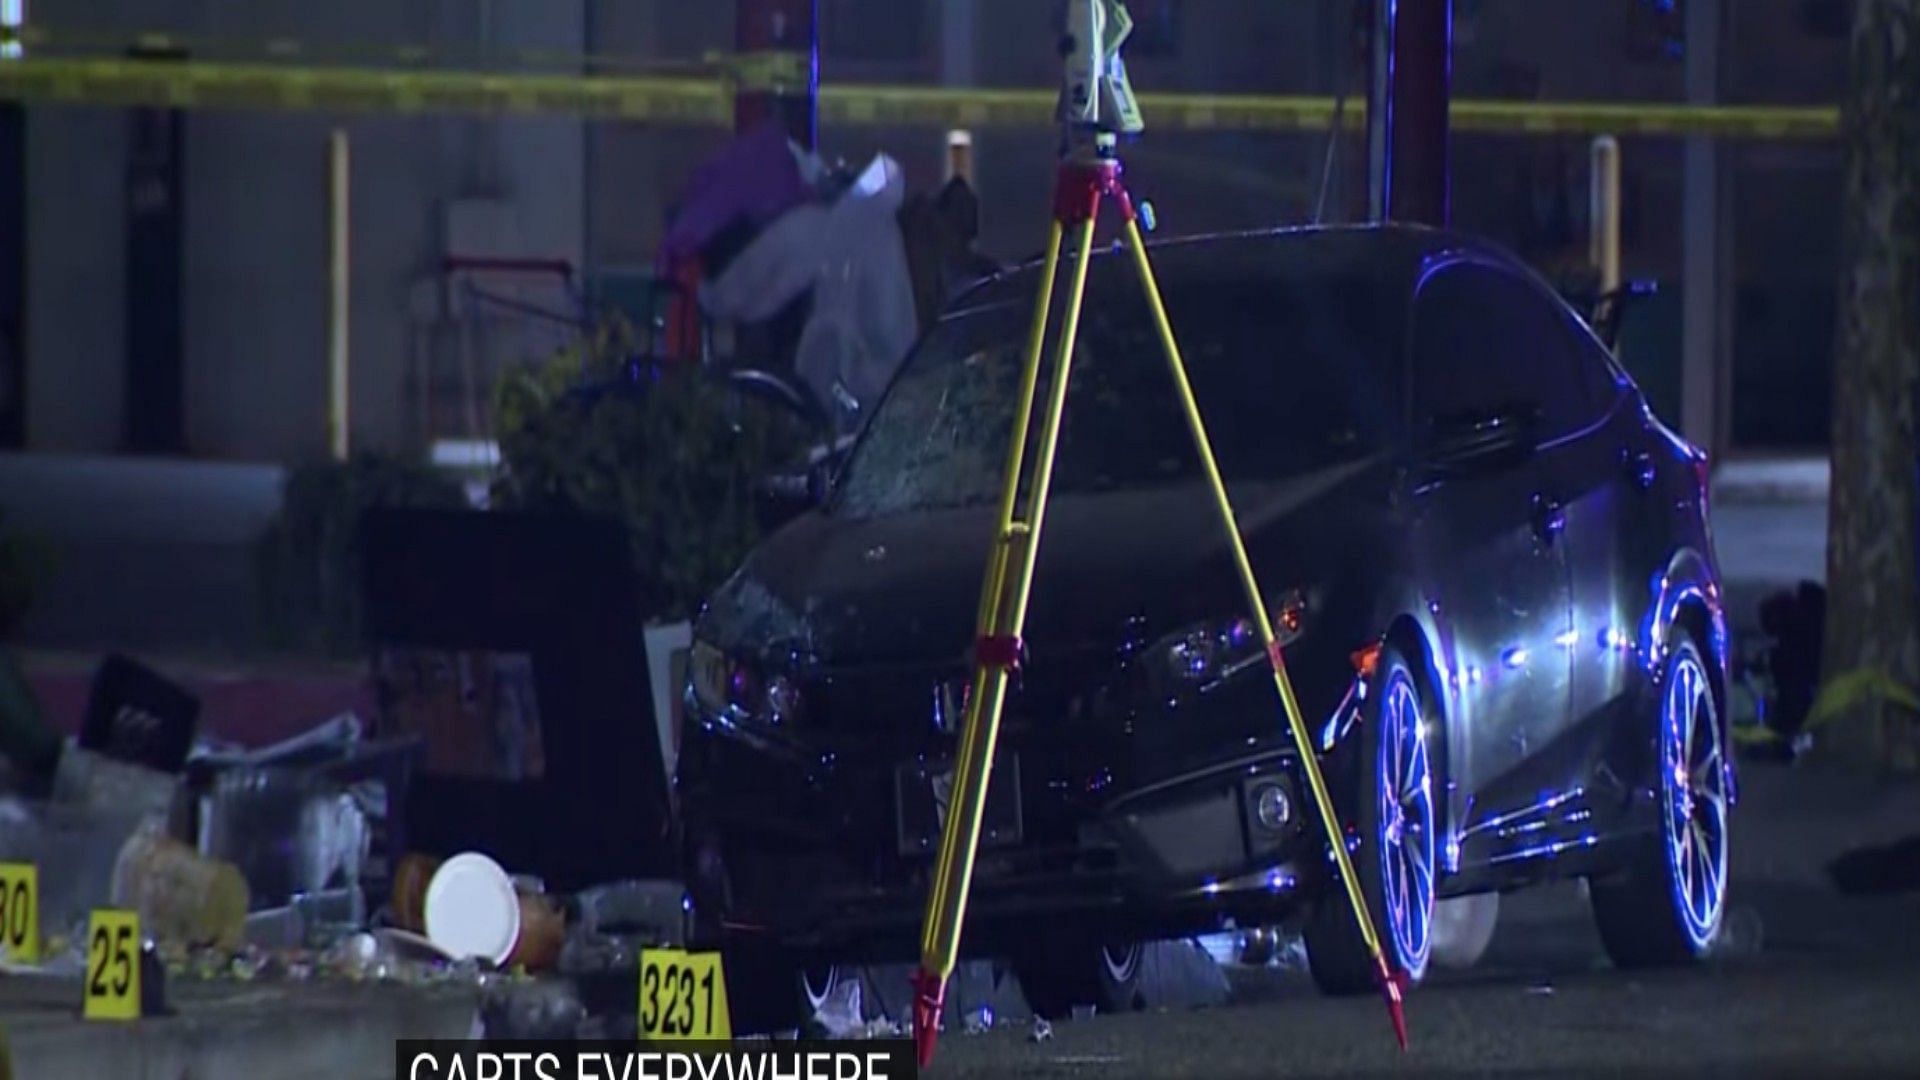 A driver rammed into a taco stand in Pomona, California (Image via ABC News/Youtube)